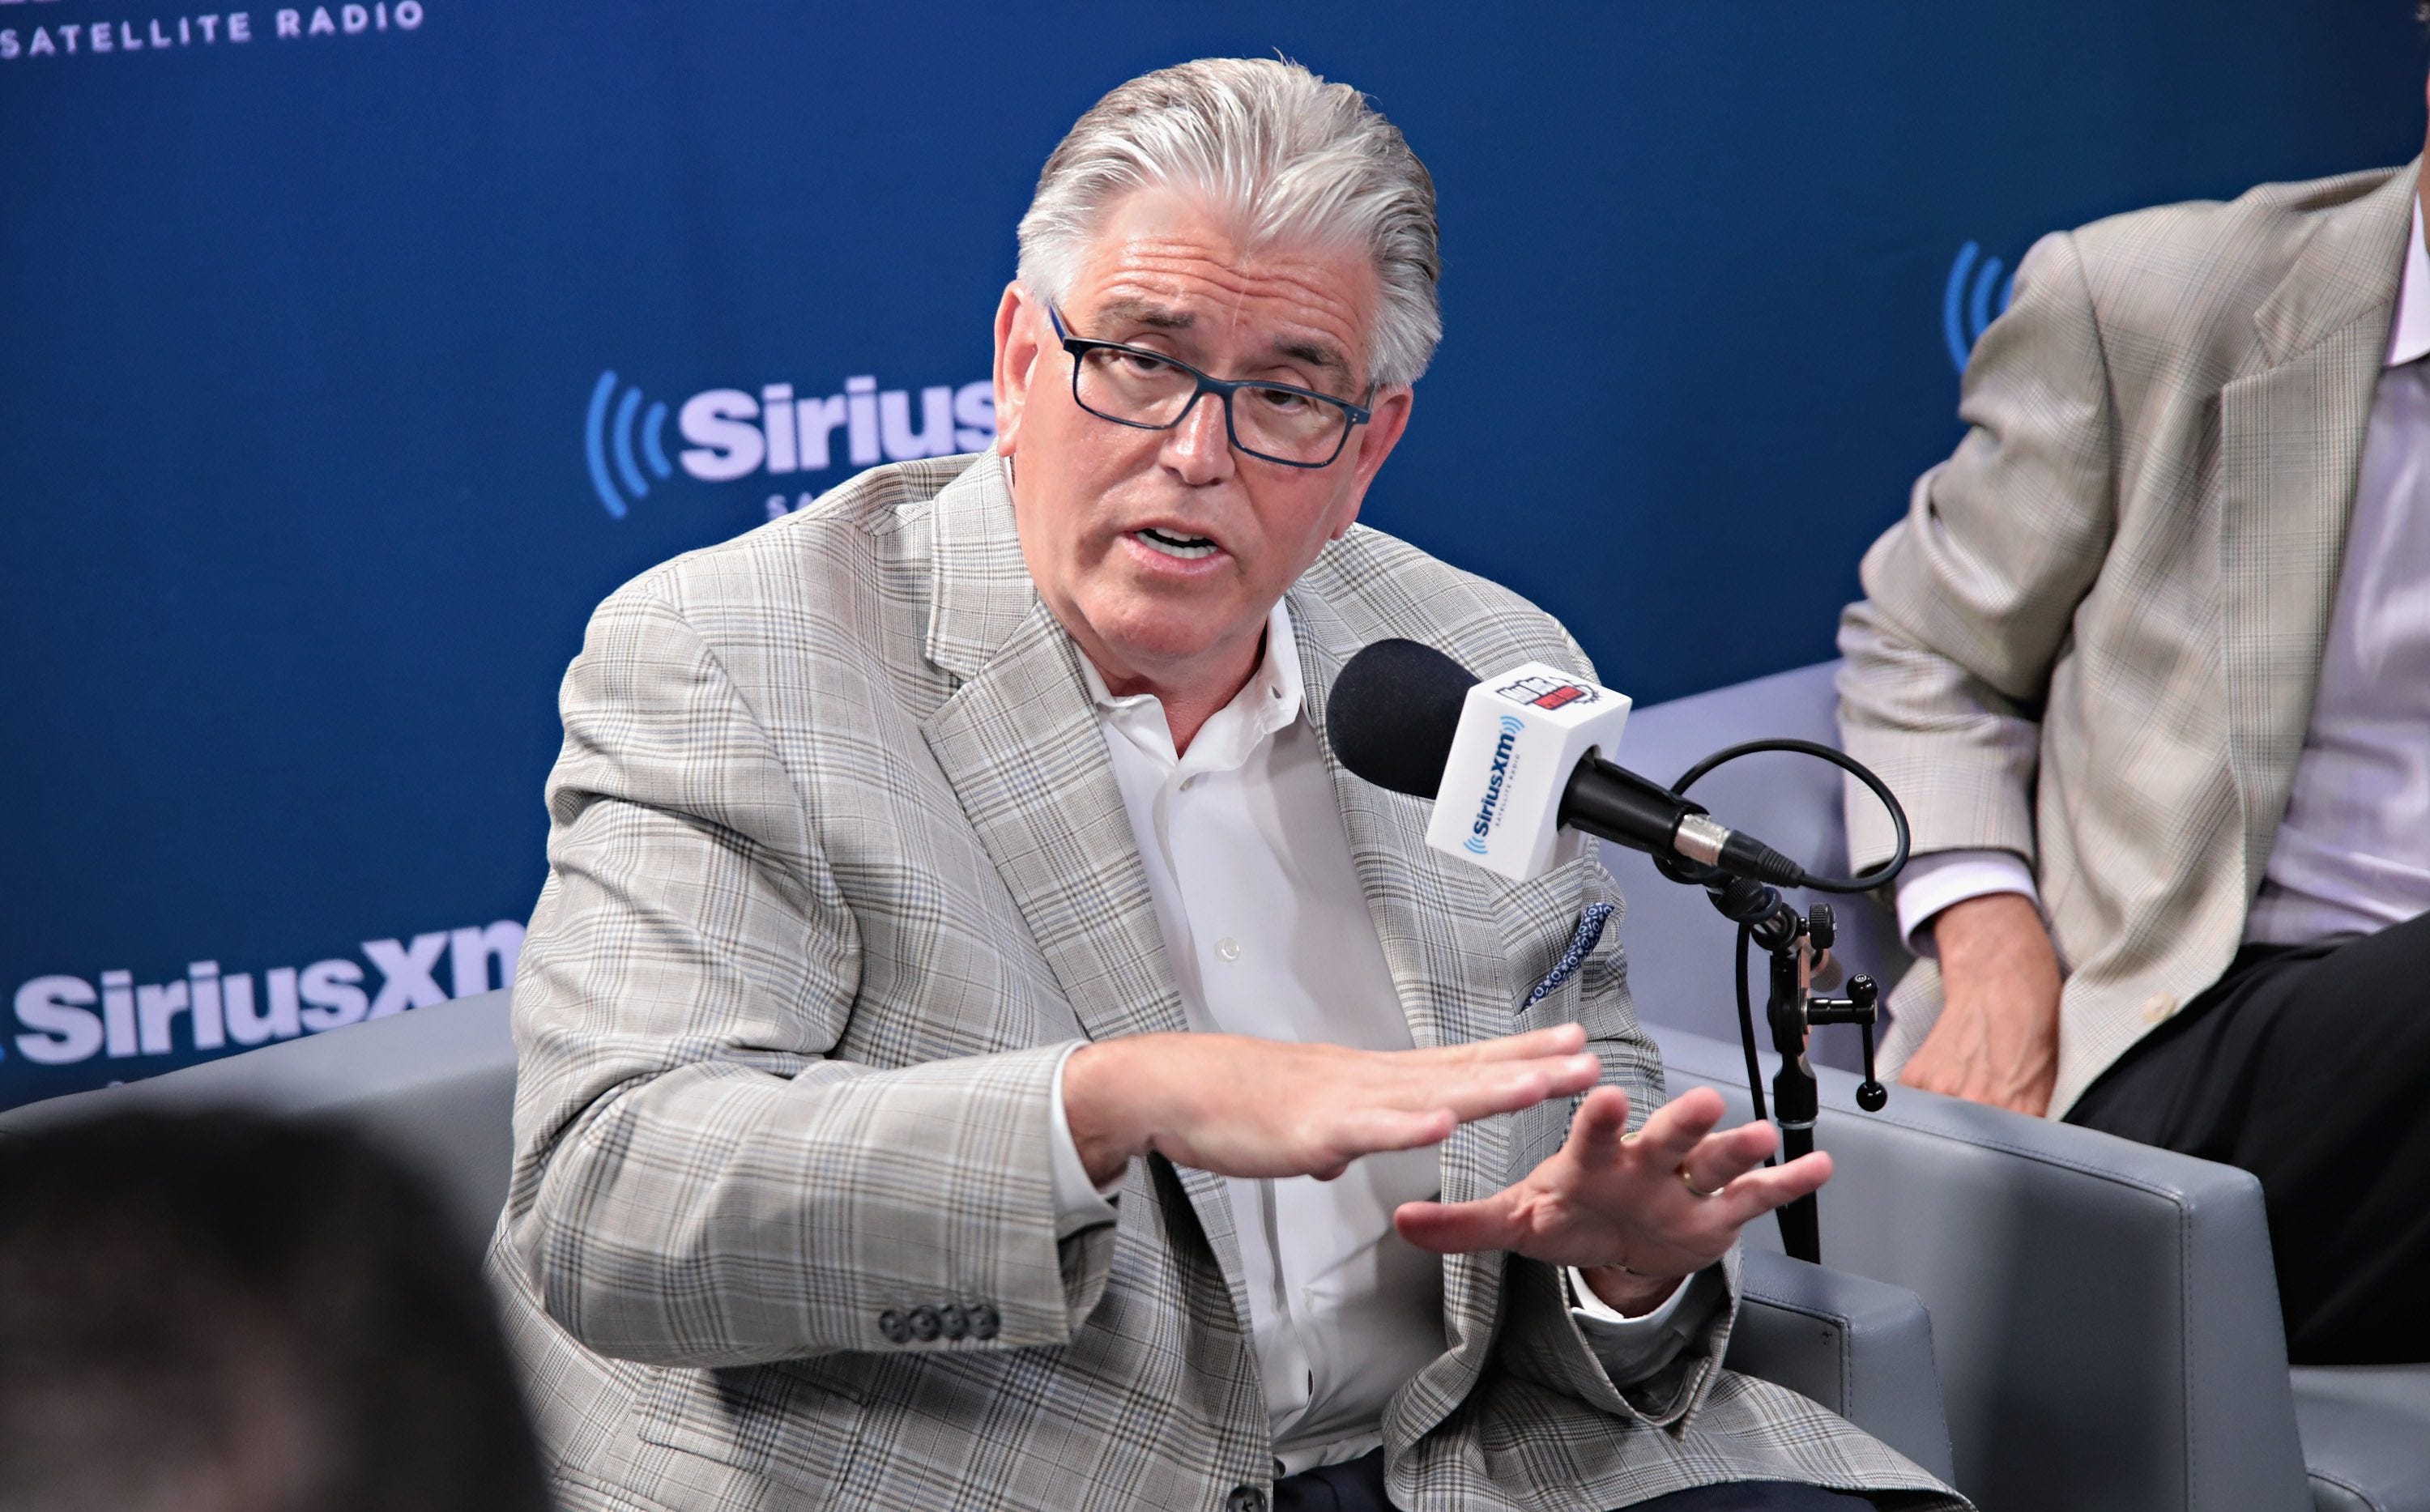 Mike Francesa rumors, news and stories [Top 20+ latest articles]